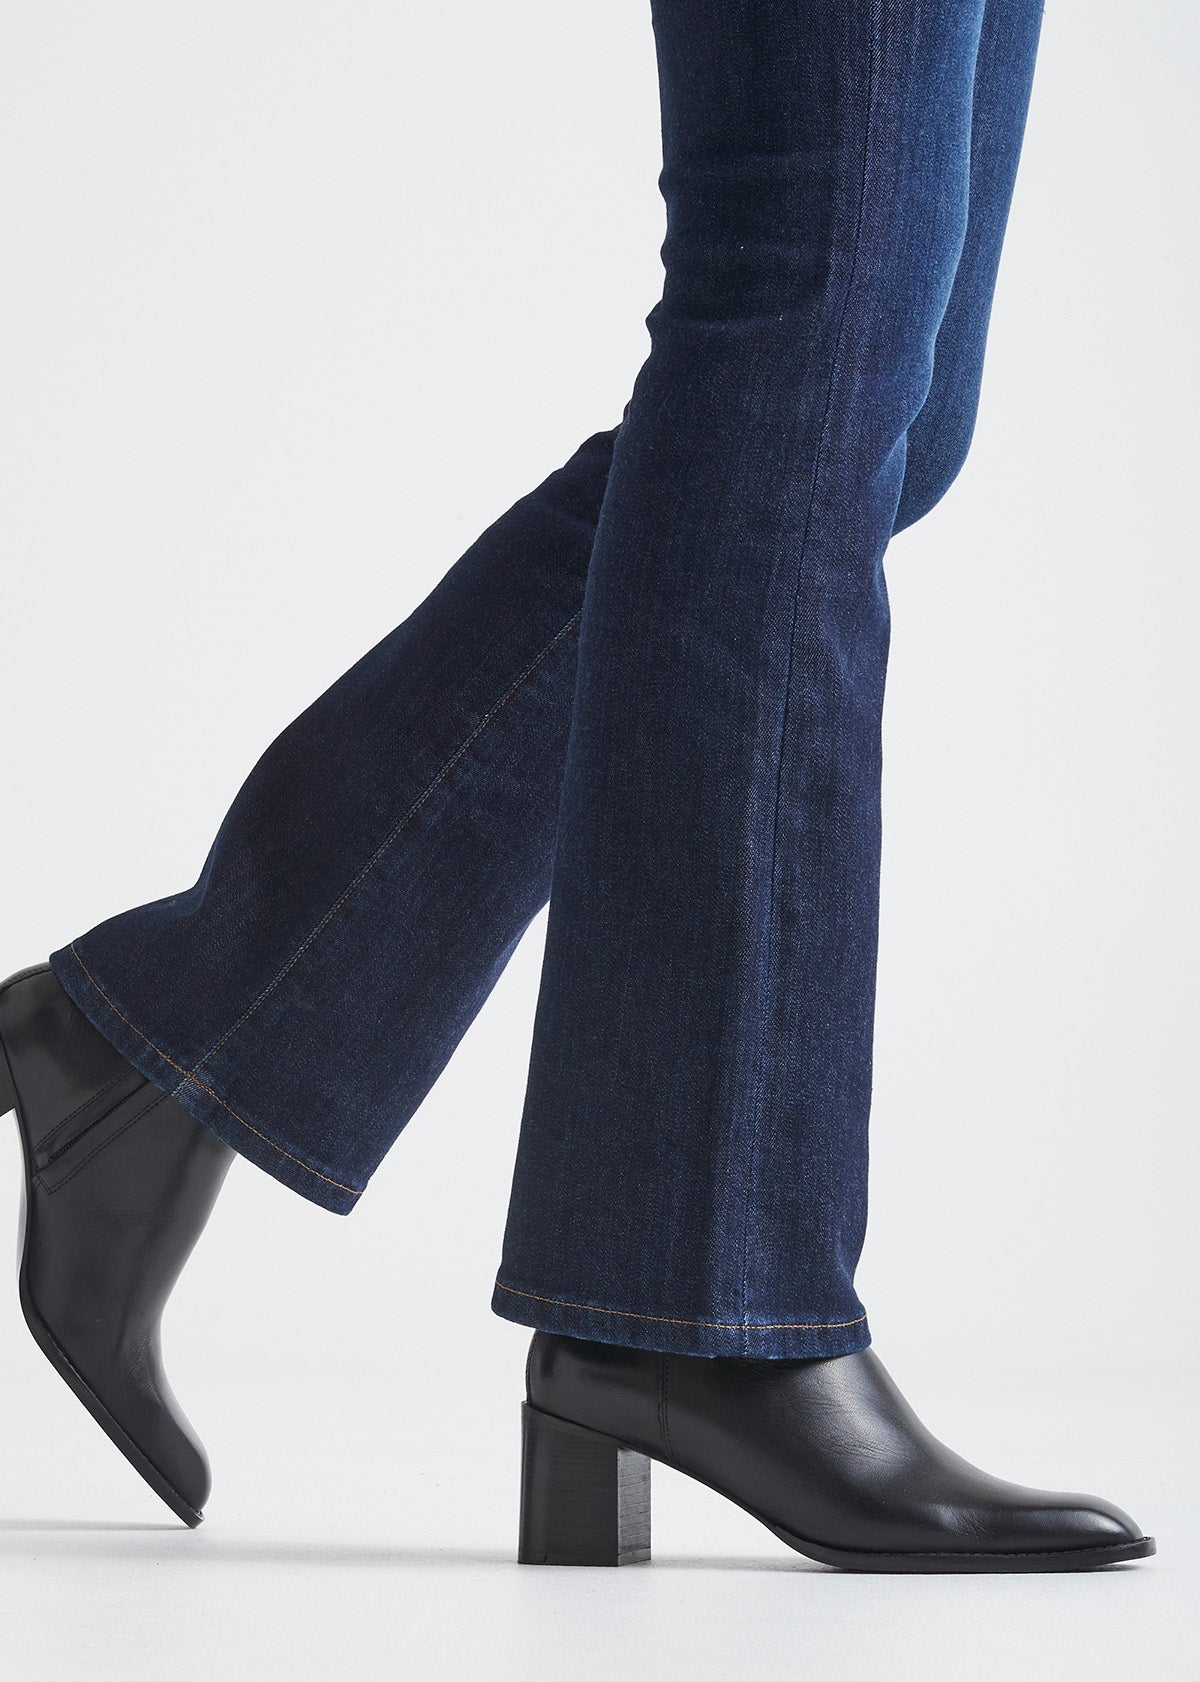 The Low Rise Bootcut – bfree boutique